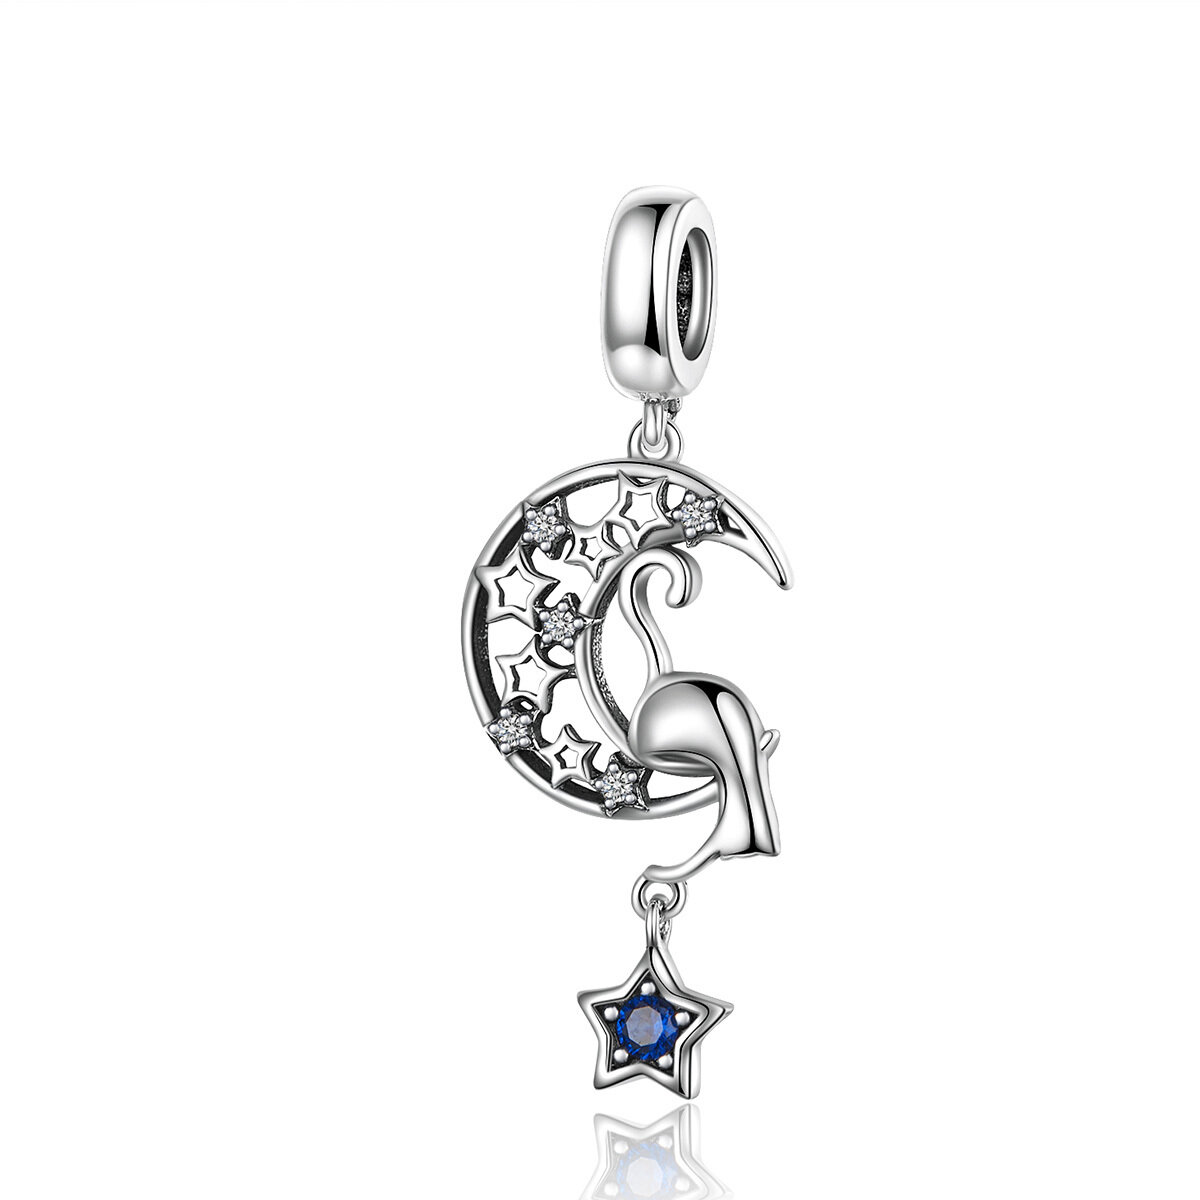 GemKing SCC1205 Moon Cat Kitty in the Moon S925 Sterling Silver Charm